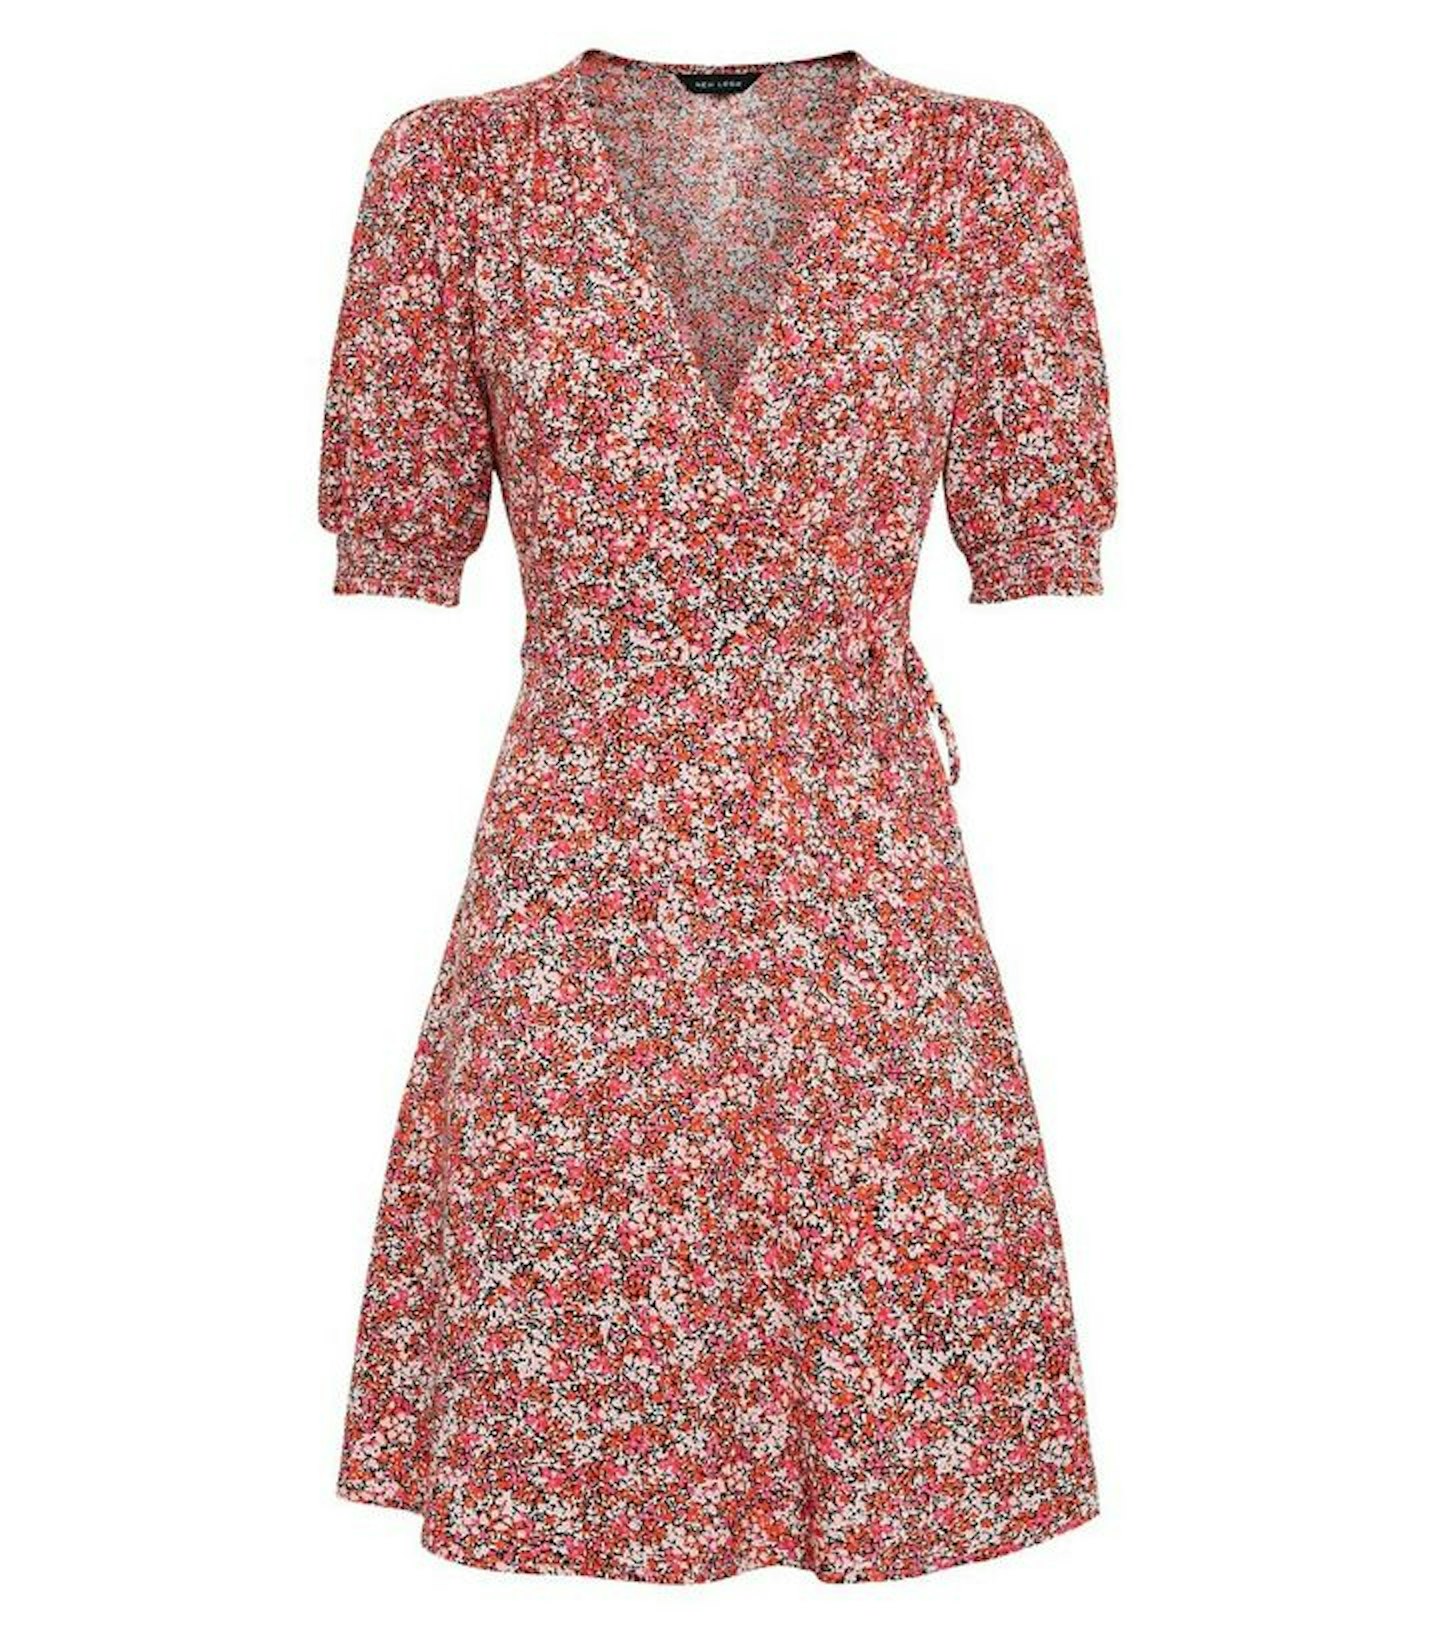 New Look, Floral Shirred Wrap Dress